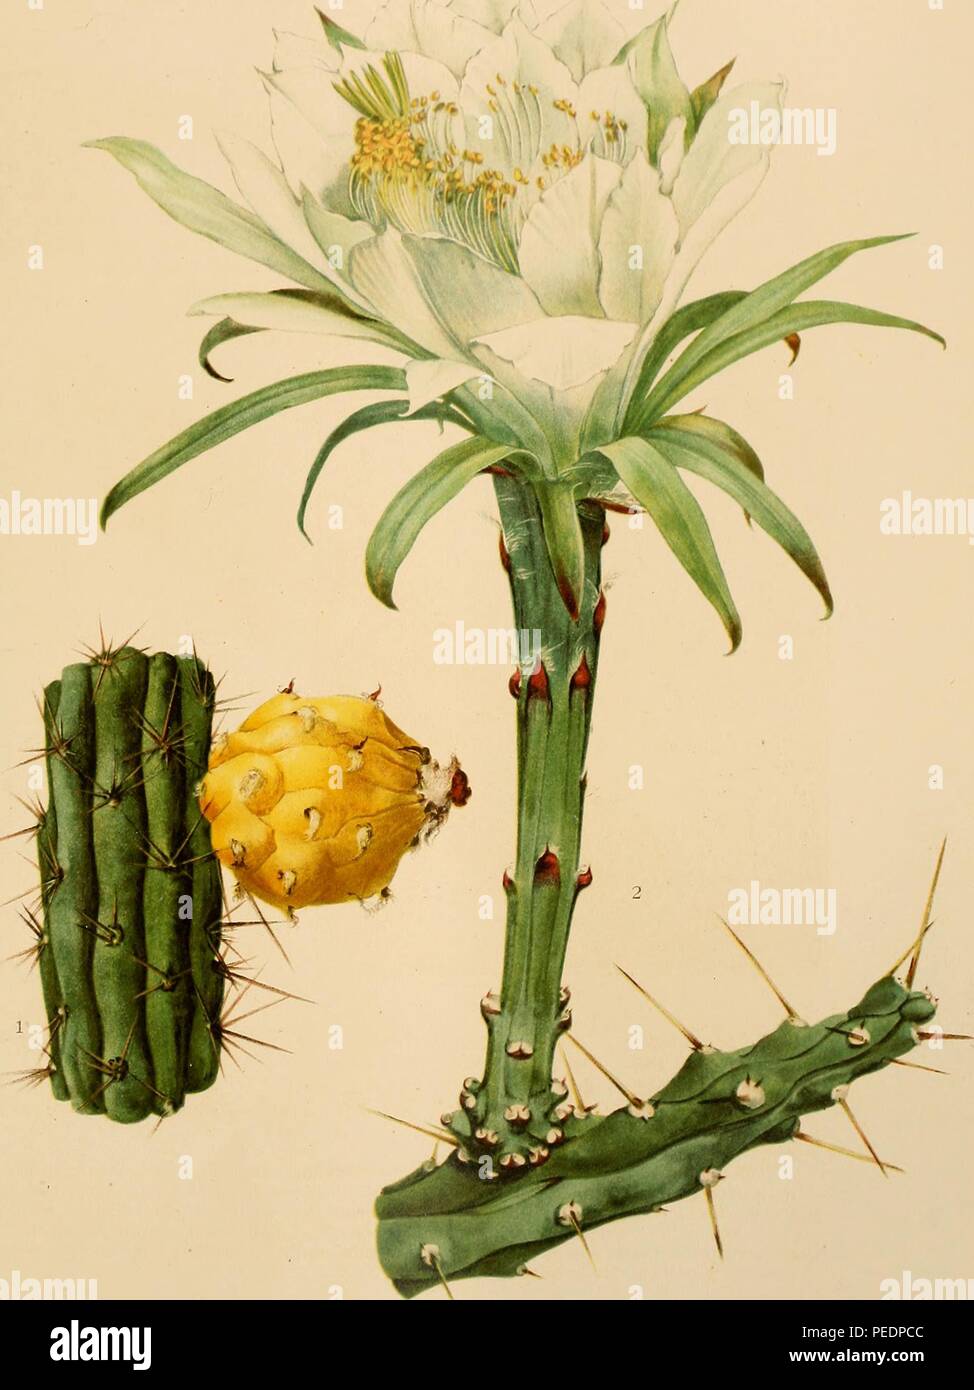 Color print of two types of night-blooming cacti, the applecactus and moonlight cactus (both members of the genus Harrisia) figure one (left) depicts a branch of Harrisia Gracilis with a large yellow fruit, and figure two (right) depicts a branch of Harrisia Martinii surmounted by a large white flower, published in 'The Cactaceae: descriptions and illustrations of plants of the cactus family', 1920. Courtesy Internet Archive. () Stock Photo